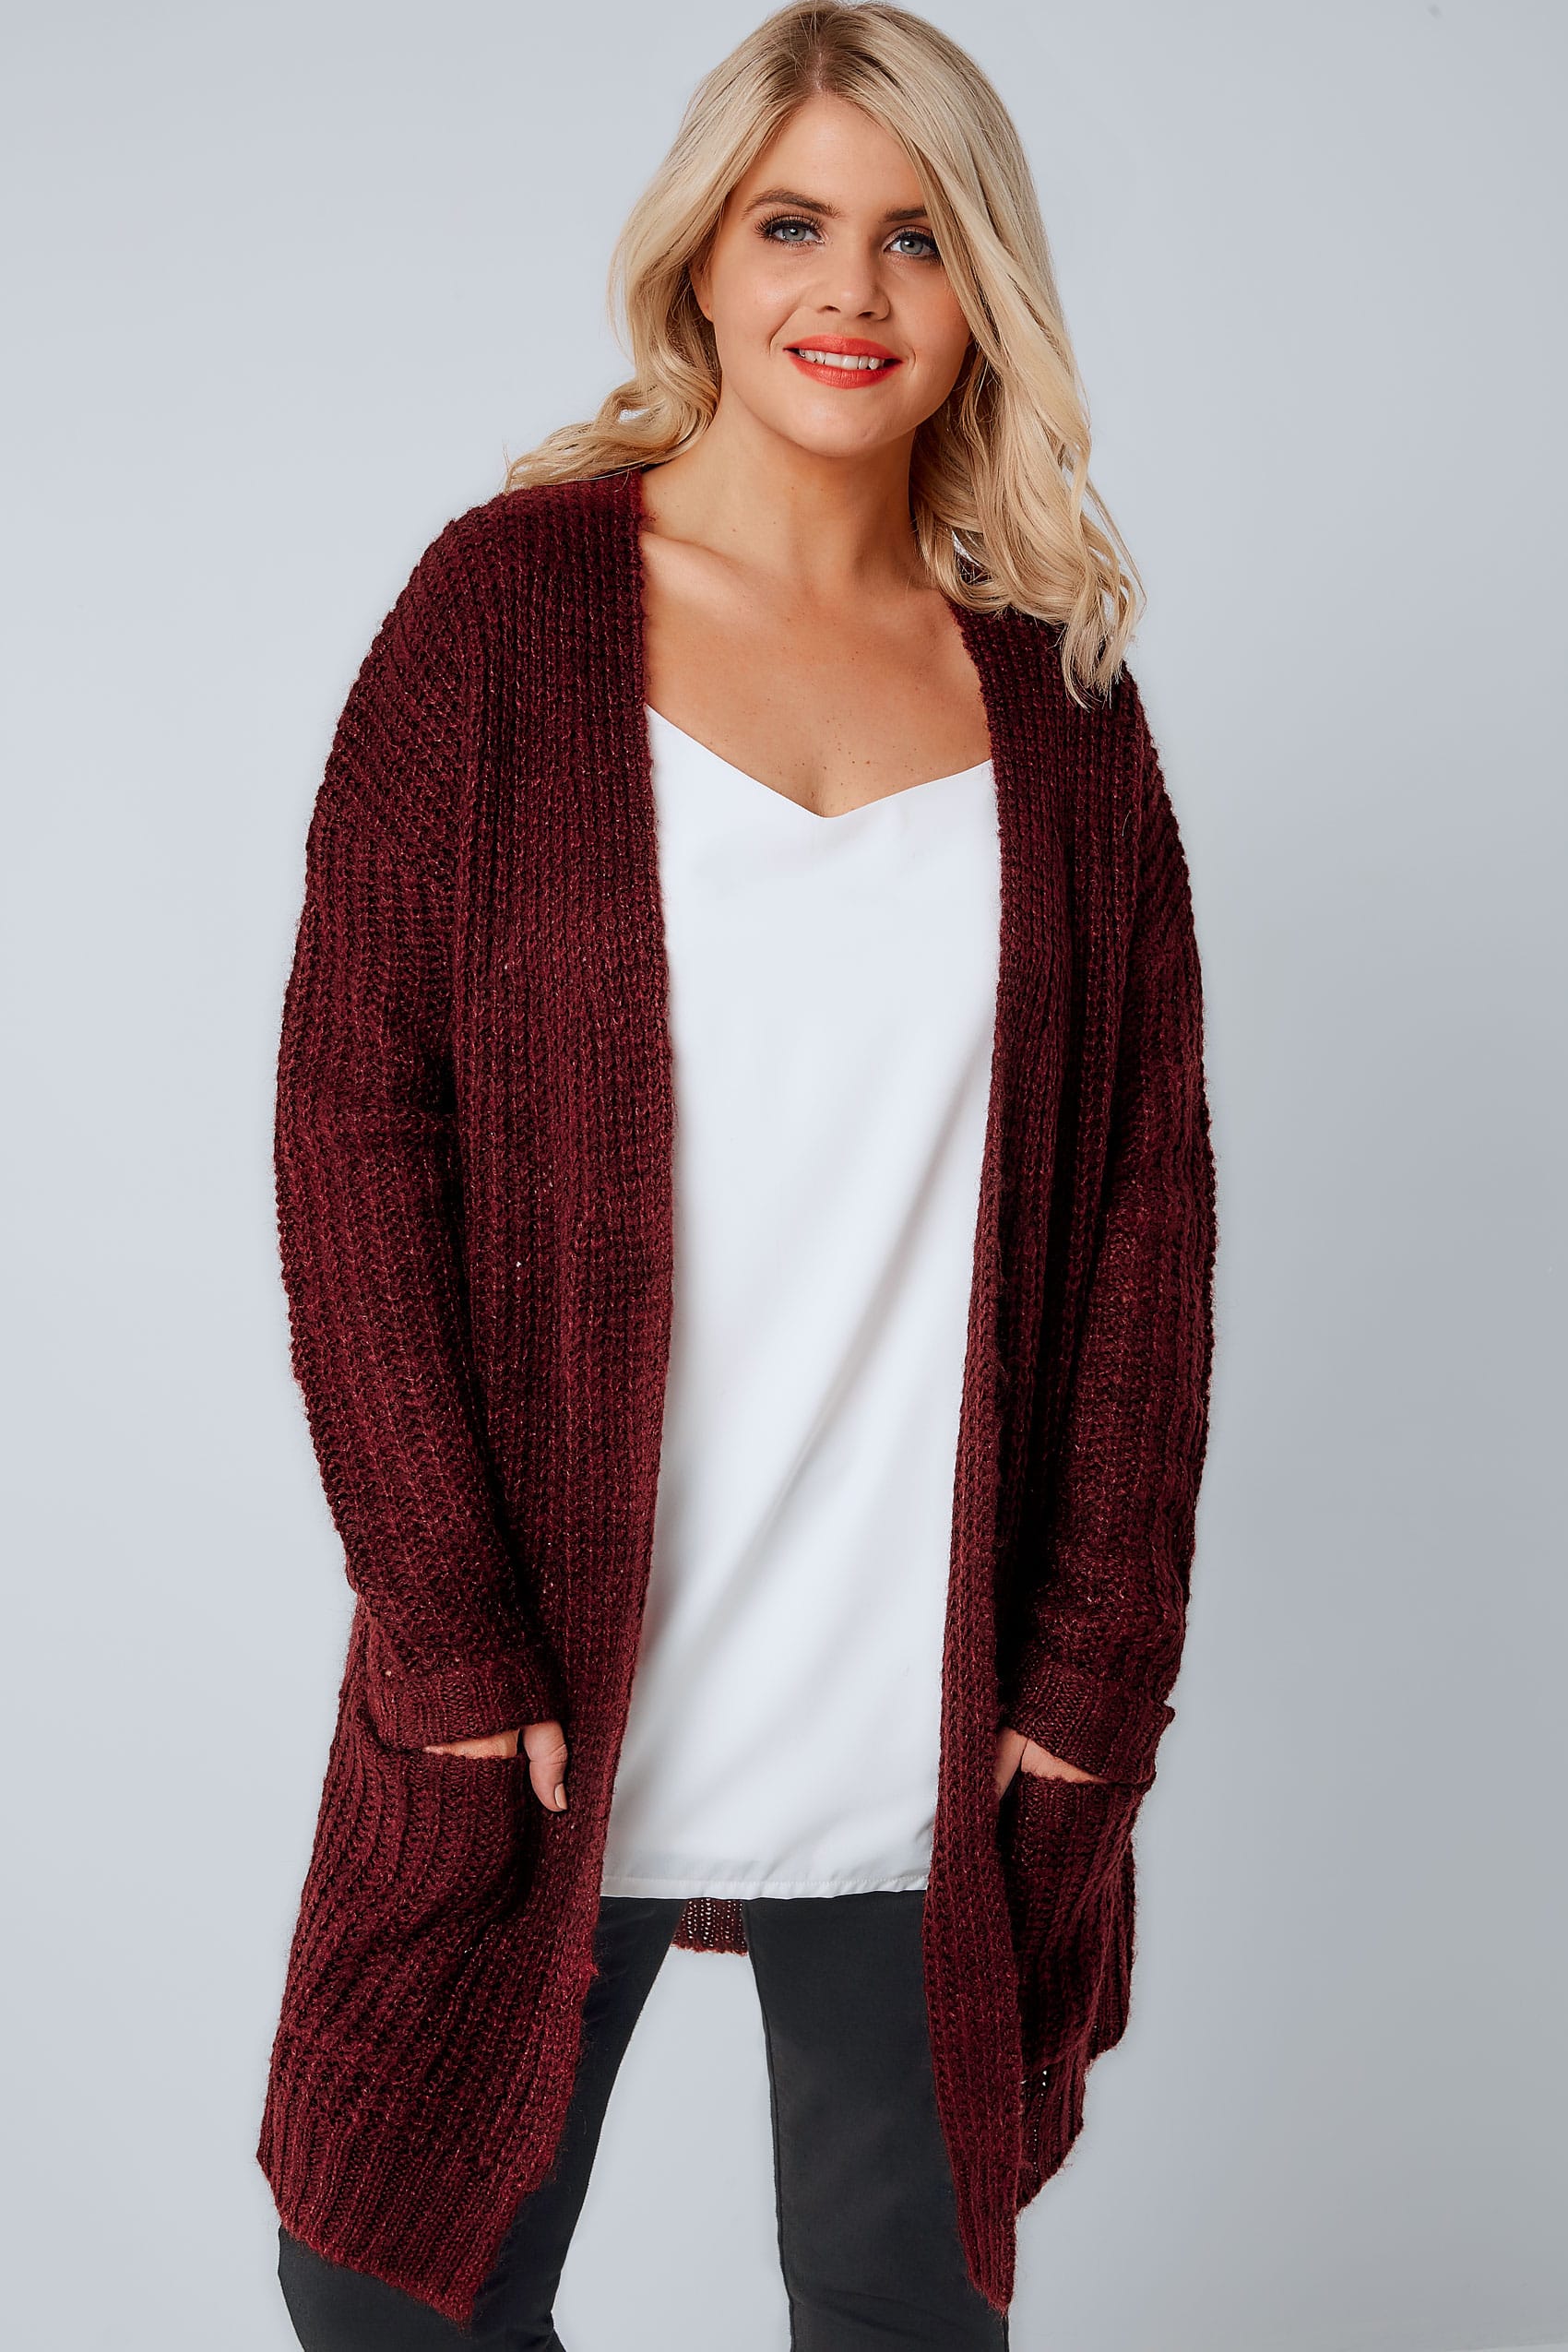 Berry Longline Chunky Knit Cardigan With Pockets, Plus size 16 to 36